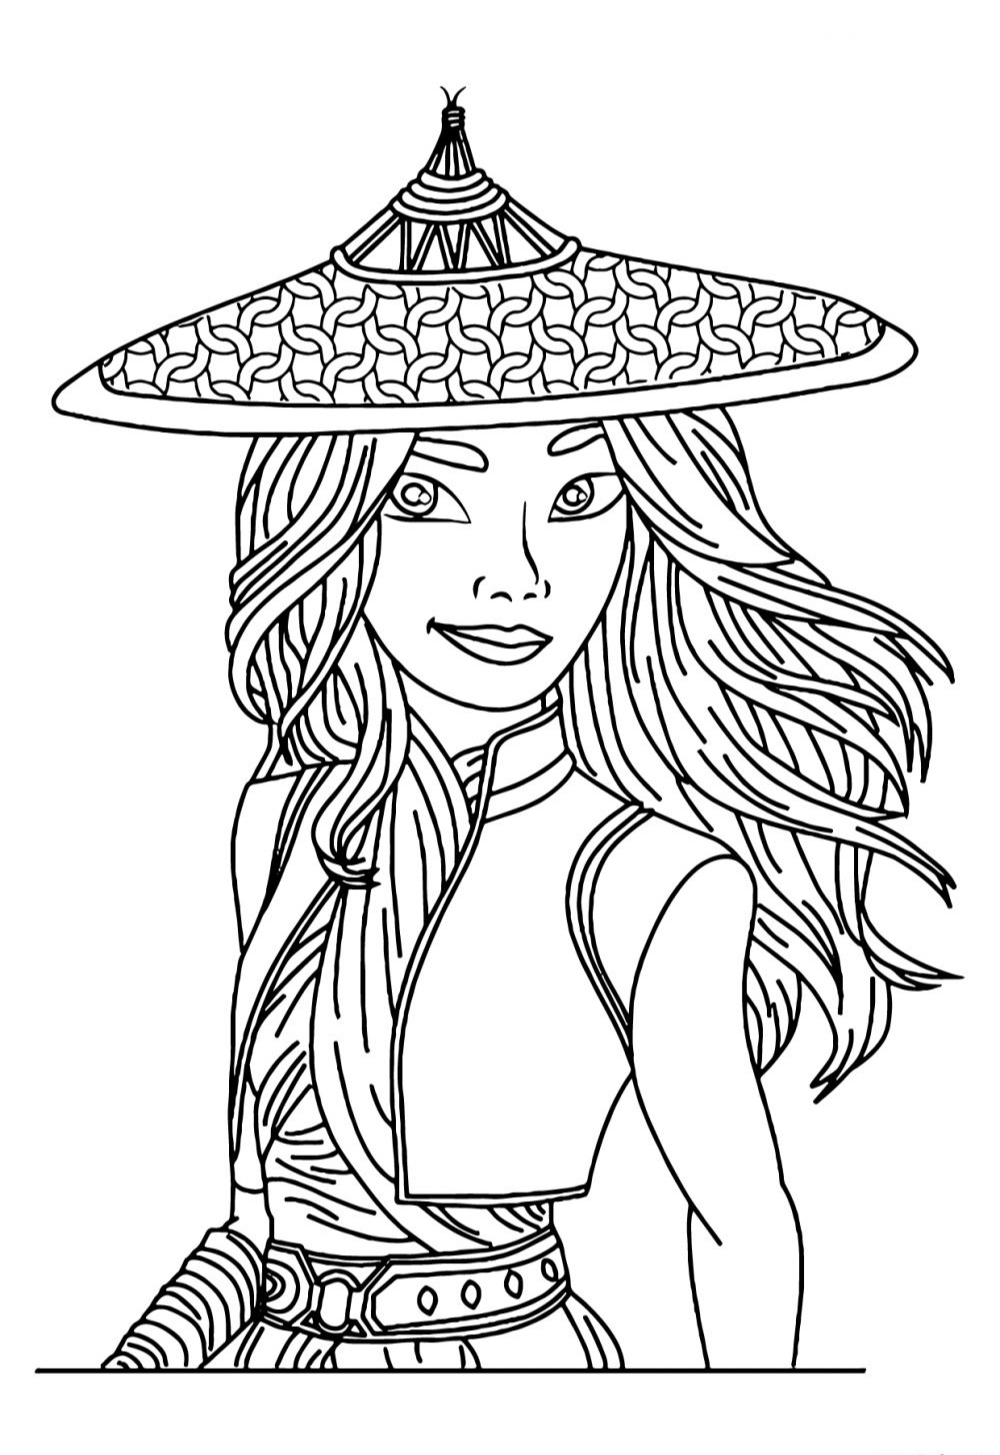 Coloring pages of Raya and the last Dragon for printing